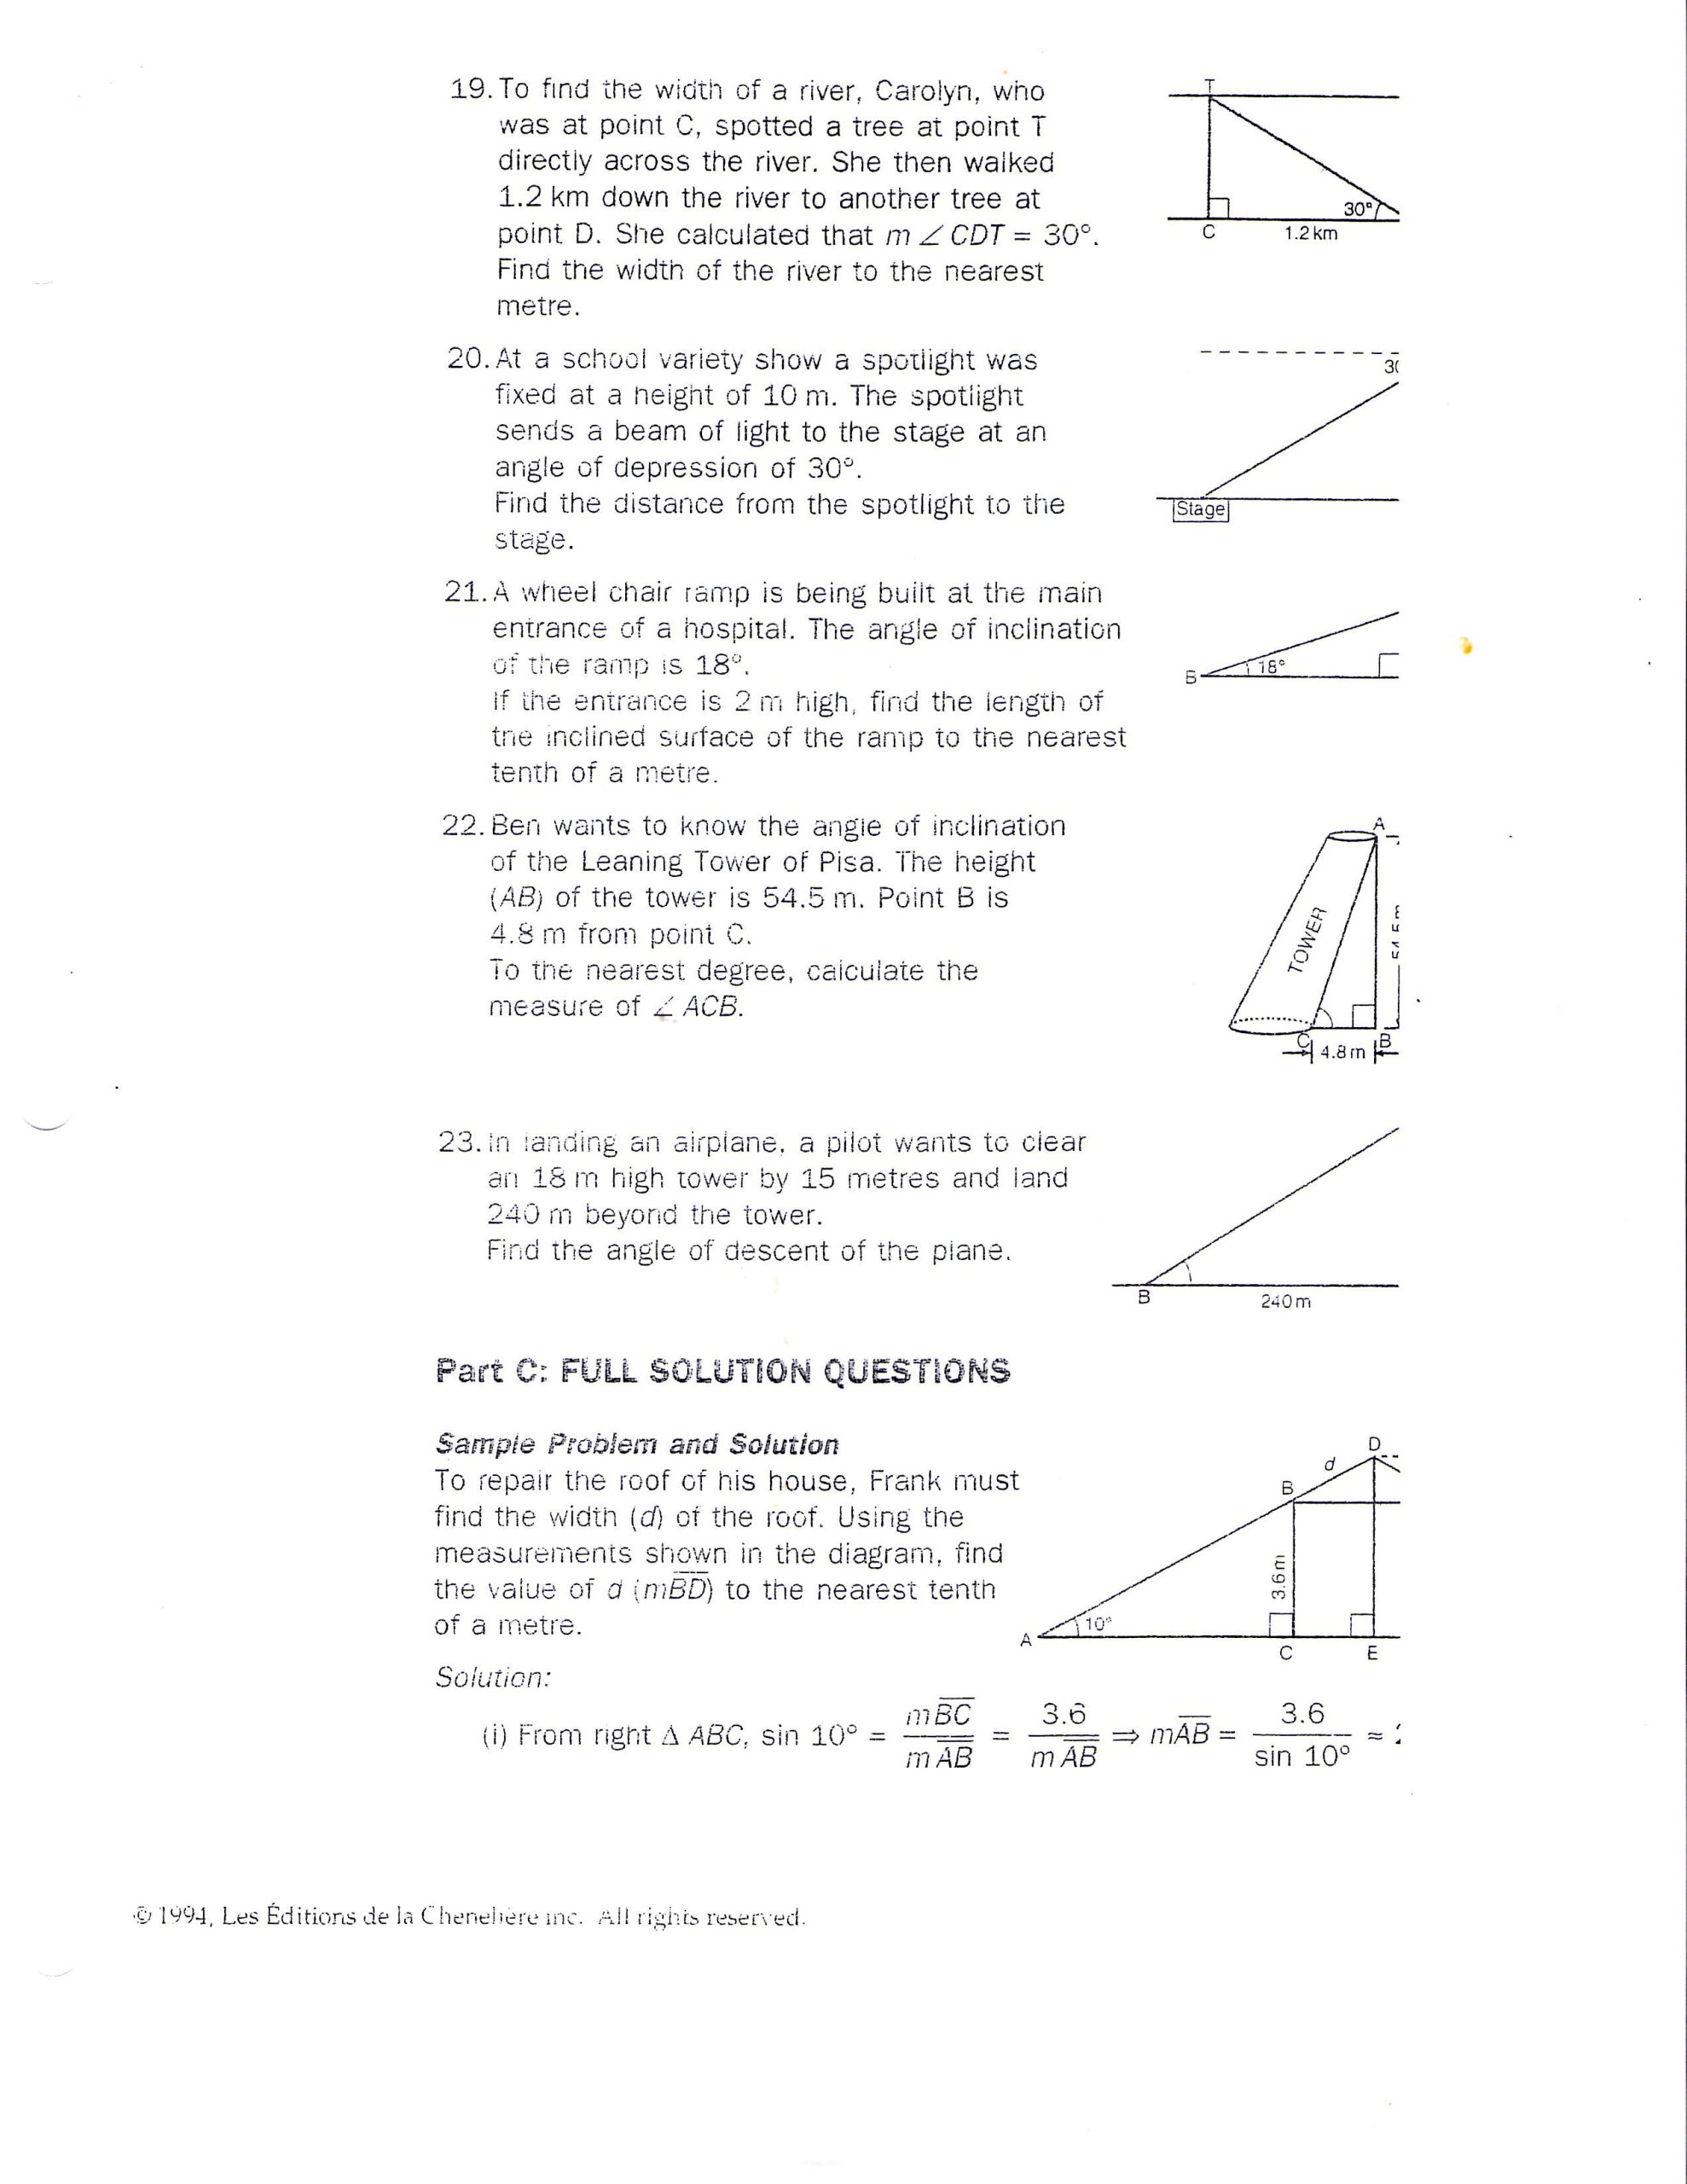 Trigonometry Word Problems Worksheet Answers Mrsmartinmath [licensed for Non Mercial Use Only] Math